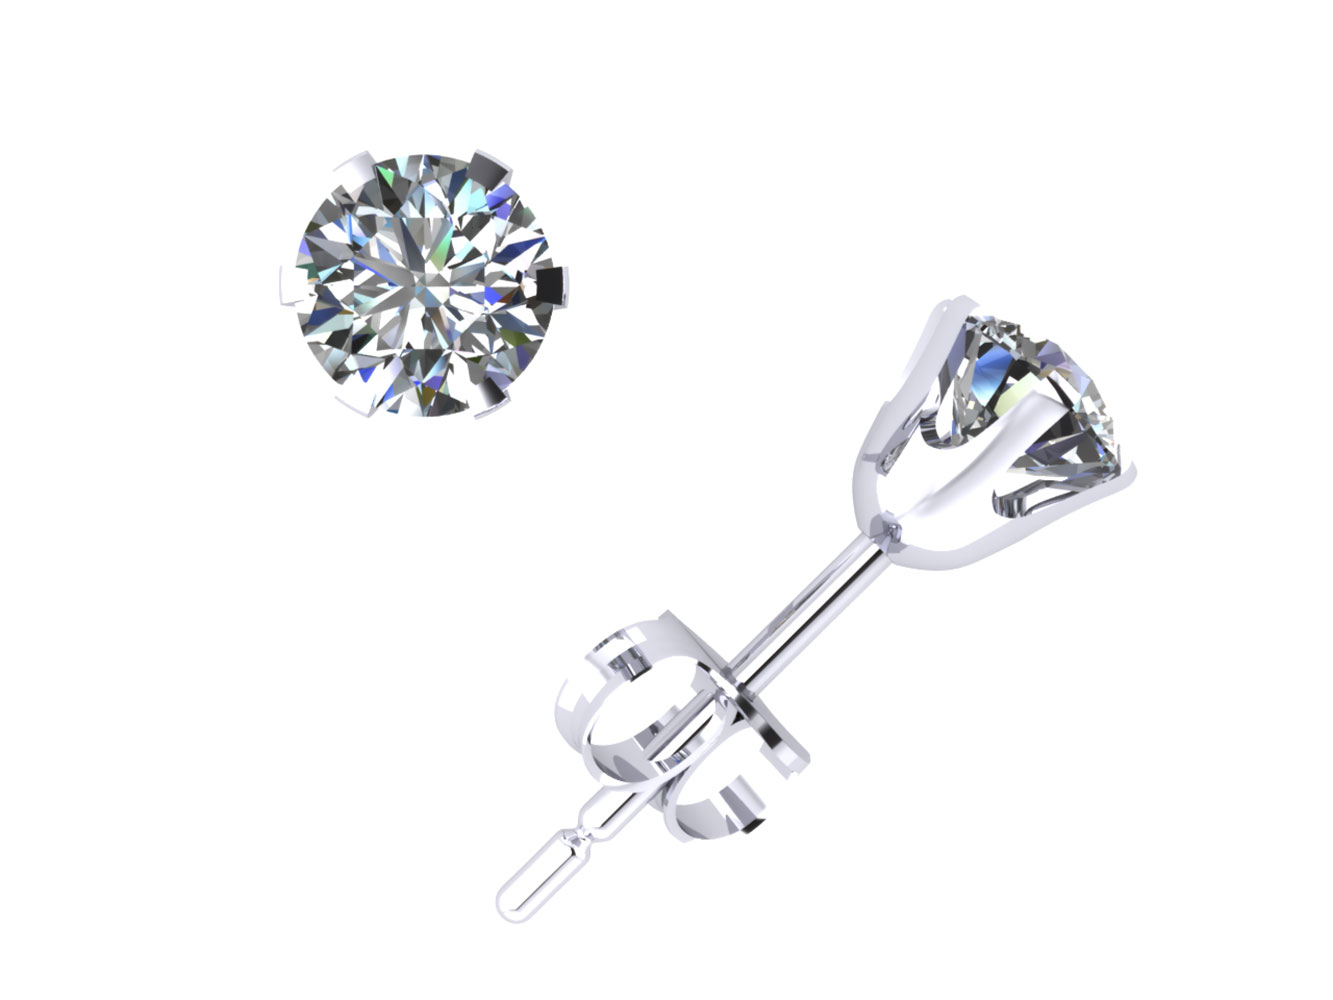 Jewel We Sell Real 0.75Ct Round Cut Diamond Stud Earrings 18k White or Yellow Gold Prong Push Back H SI2